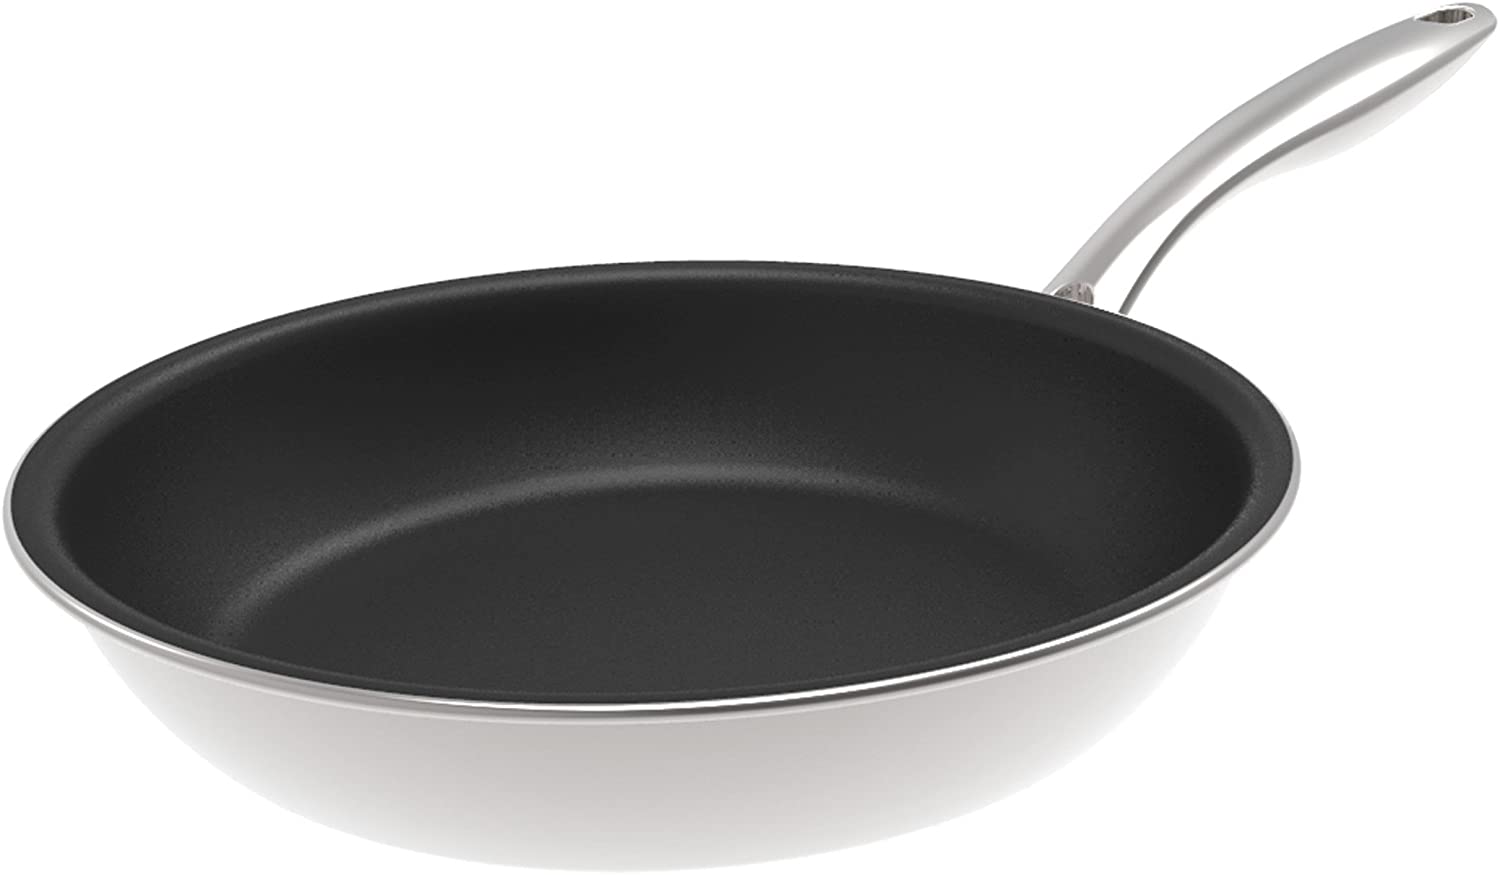 Kuhn Rikon 51 x 30 x 7 cm Stainless Steel Swiss Multiply Non-Stick Frying Pan, Silver